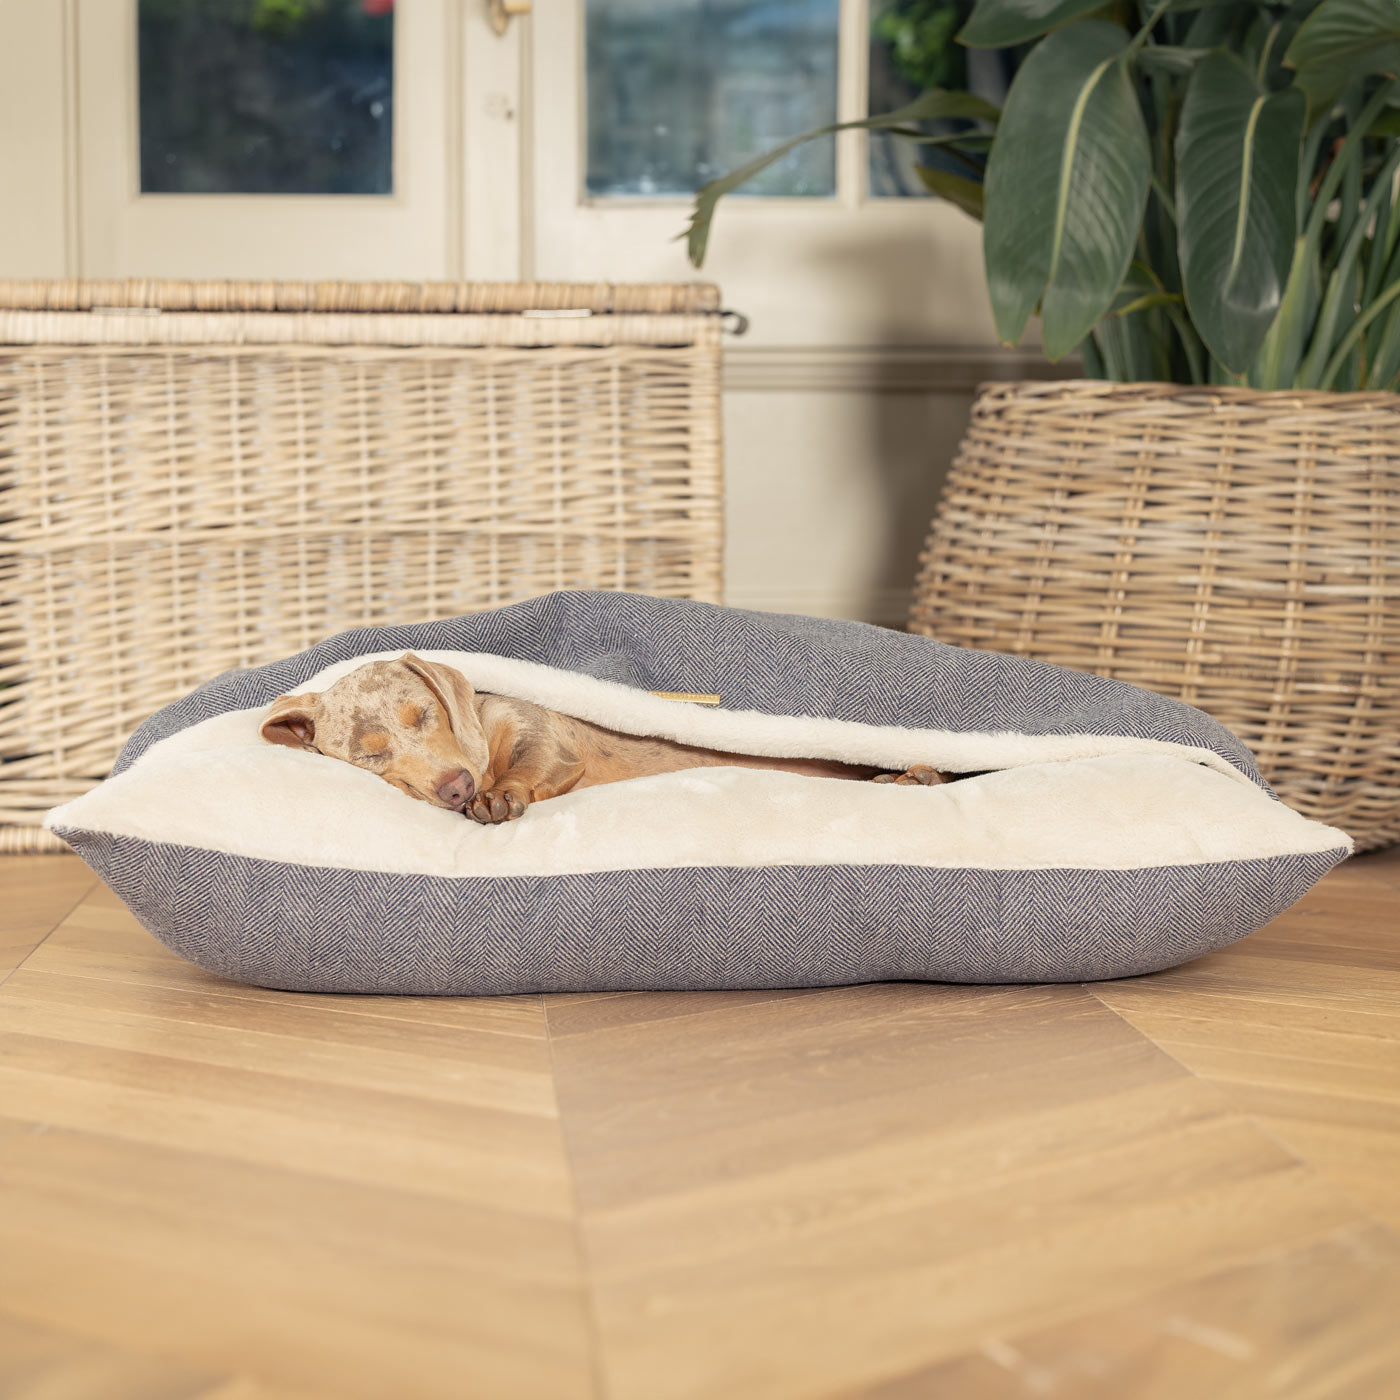 Discover The Perfect Burrow For Your Pet, Our Stunning Sleepy Burrow Dog Beds In Oxford Herringbone Is The Perfect Bed Choice For Your Pet, Available Now at Lords & Labradors US